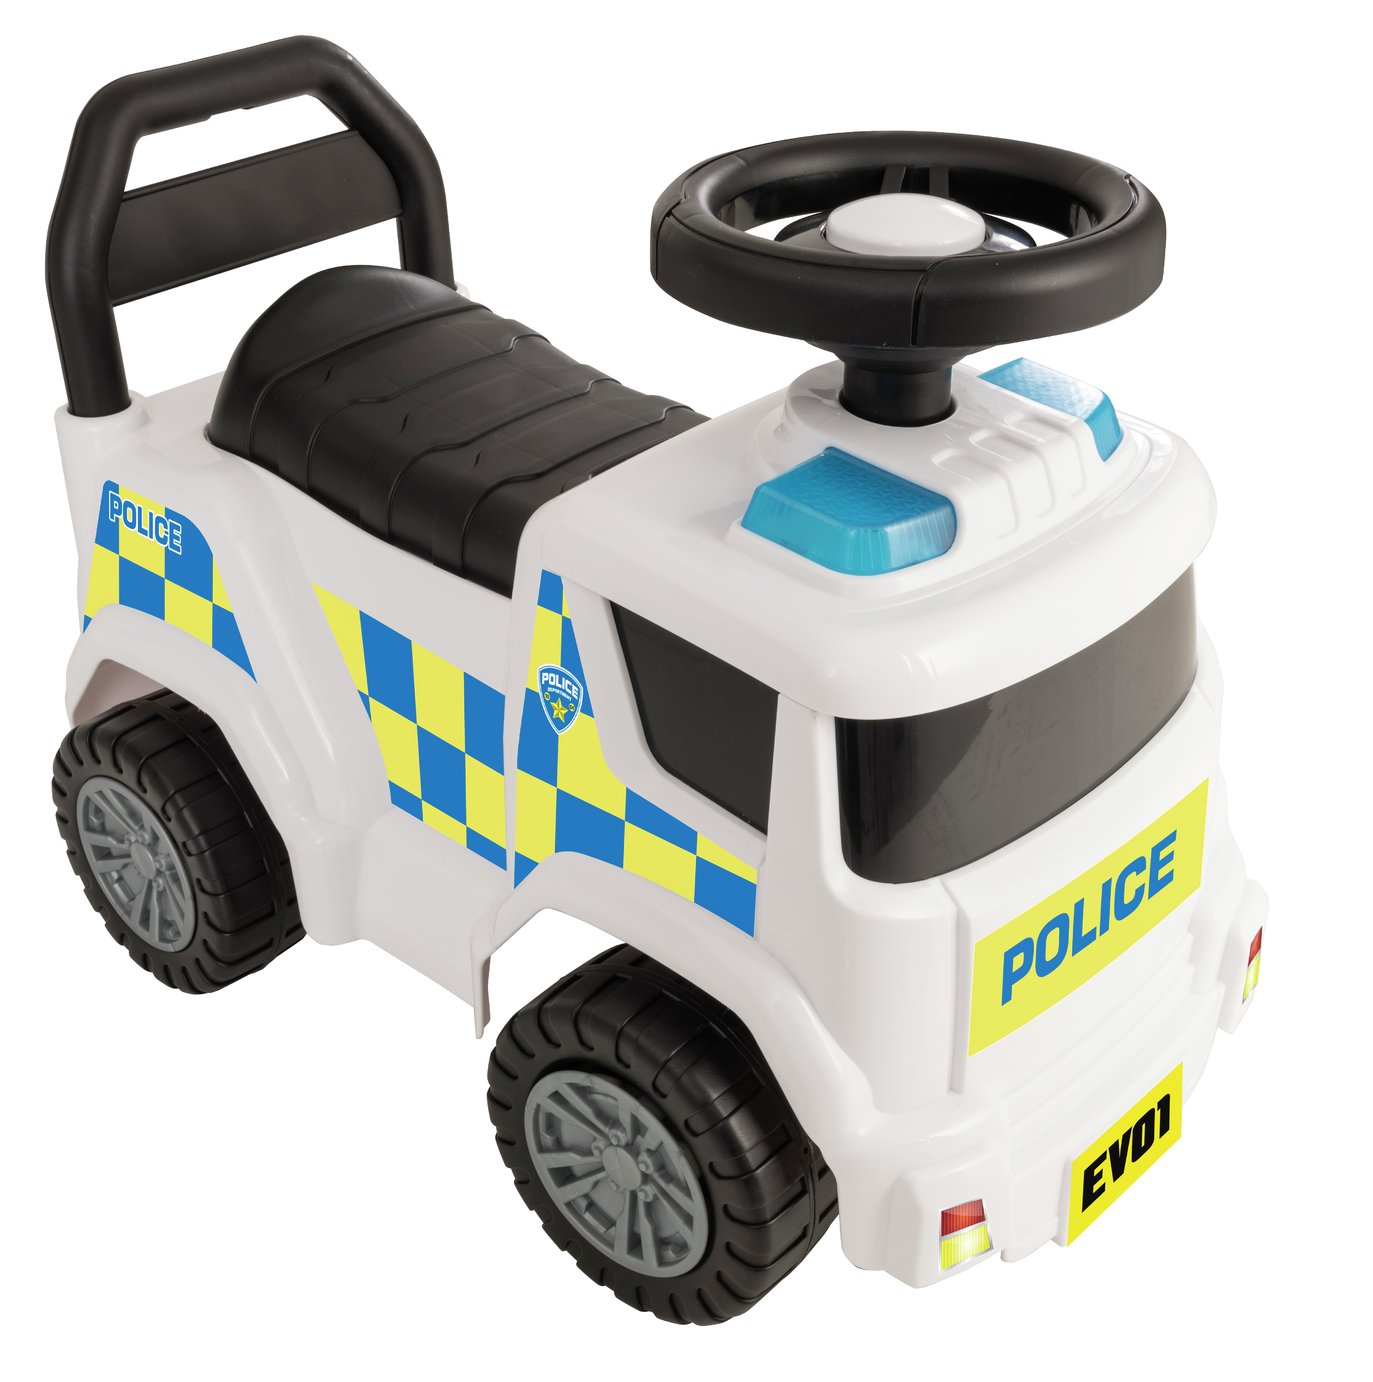 Evo Foot To Floor Police Ride On review